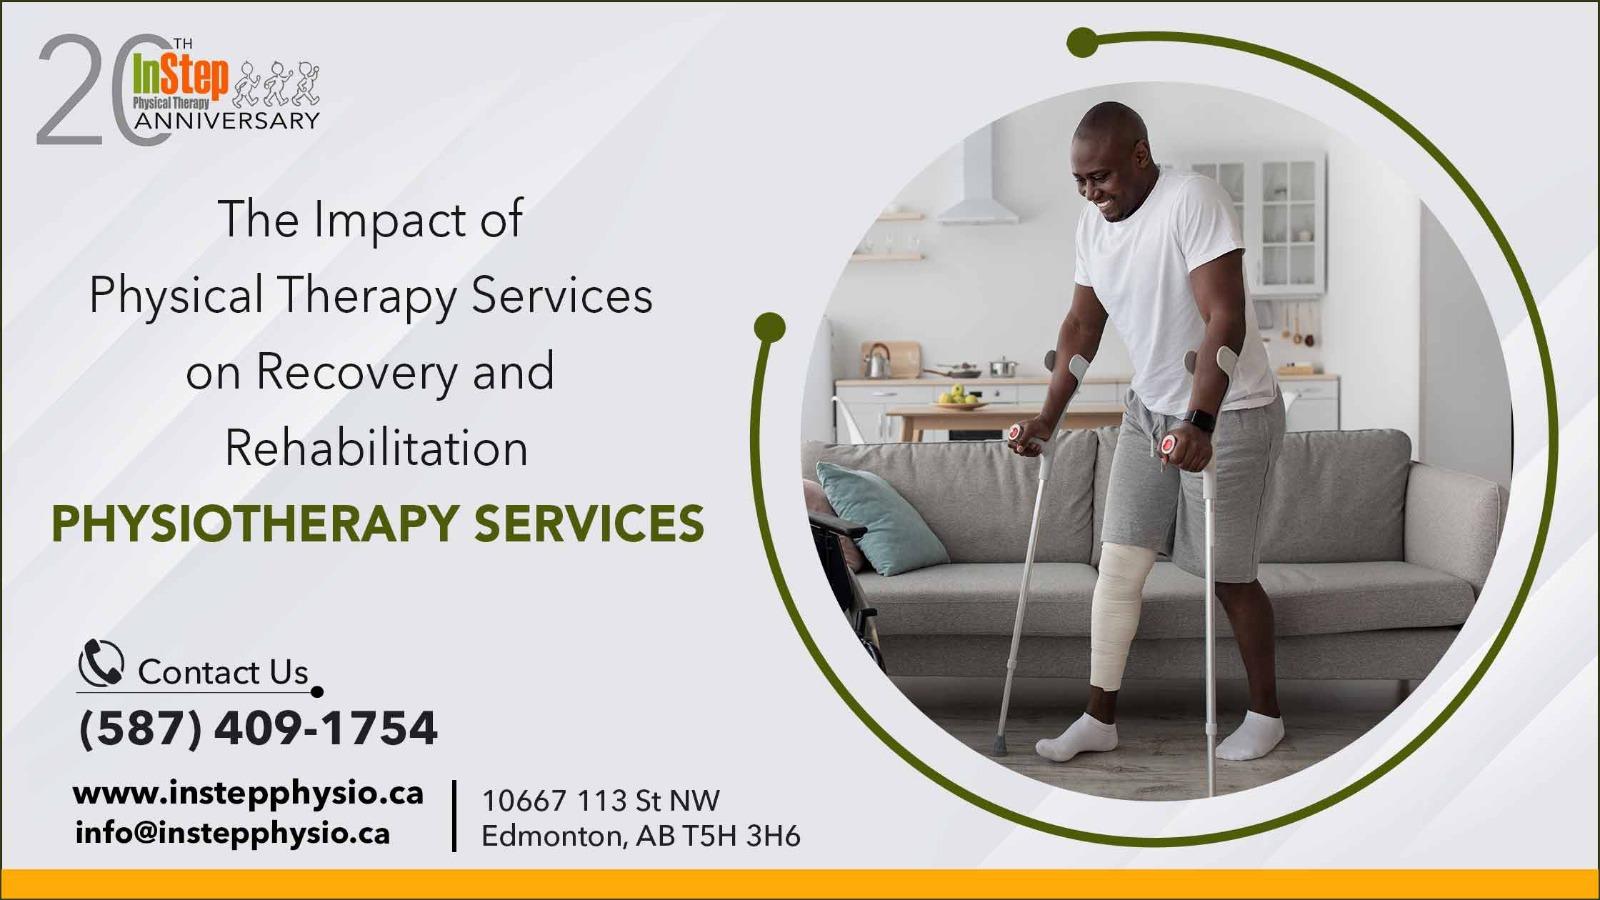 The Impact of Physical Therapy Services on Recovery and Rehabilitation